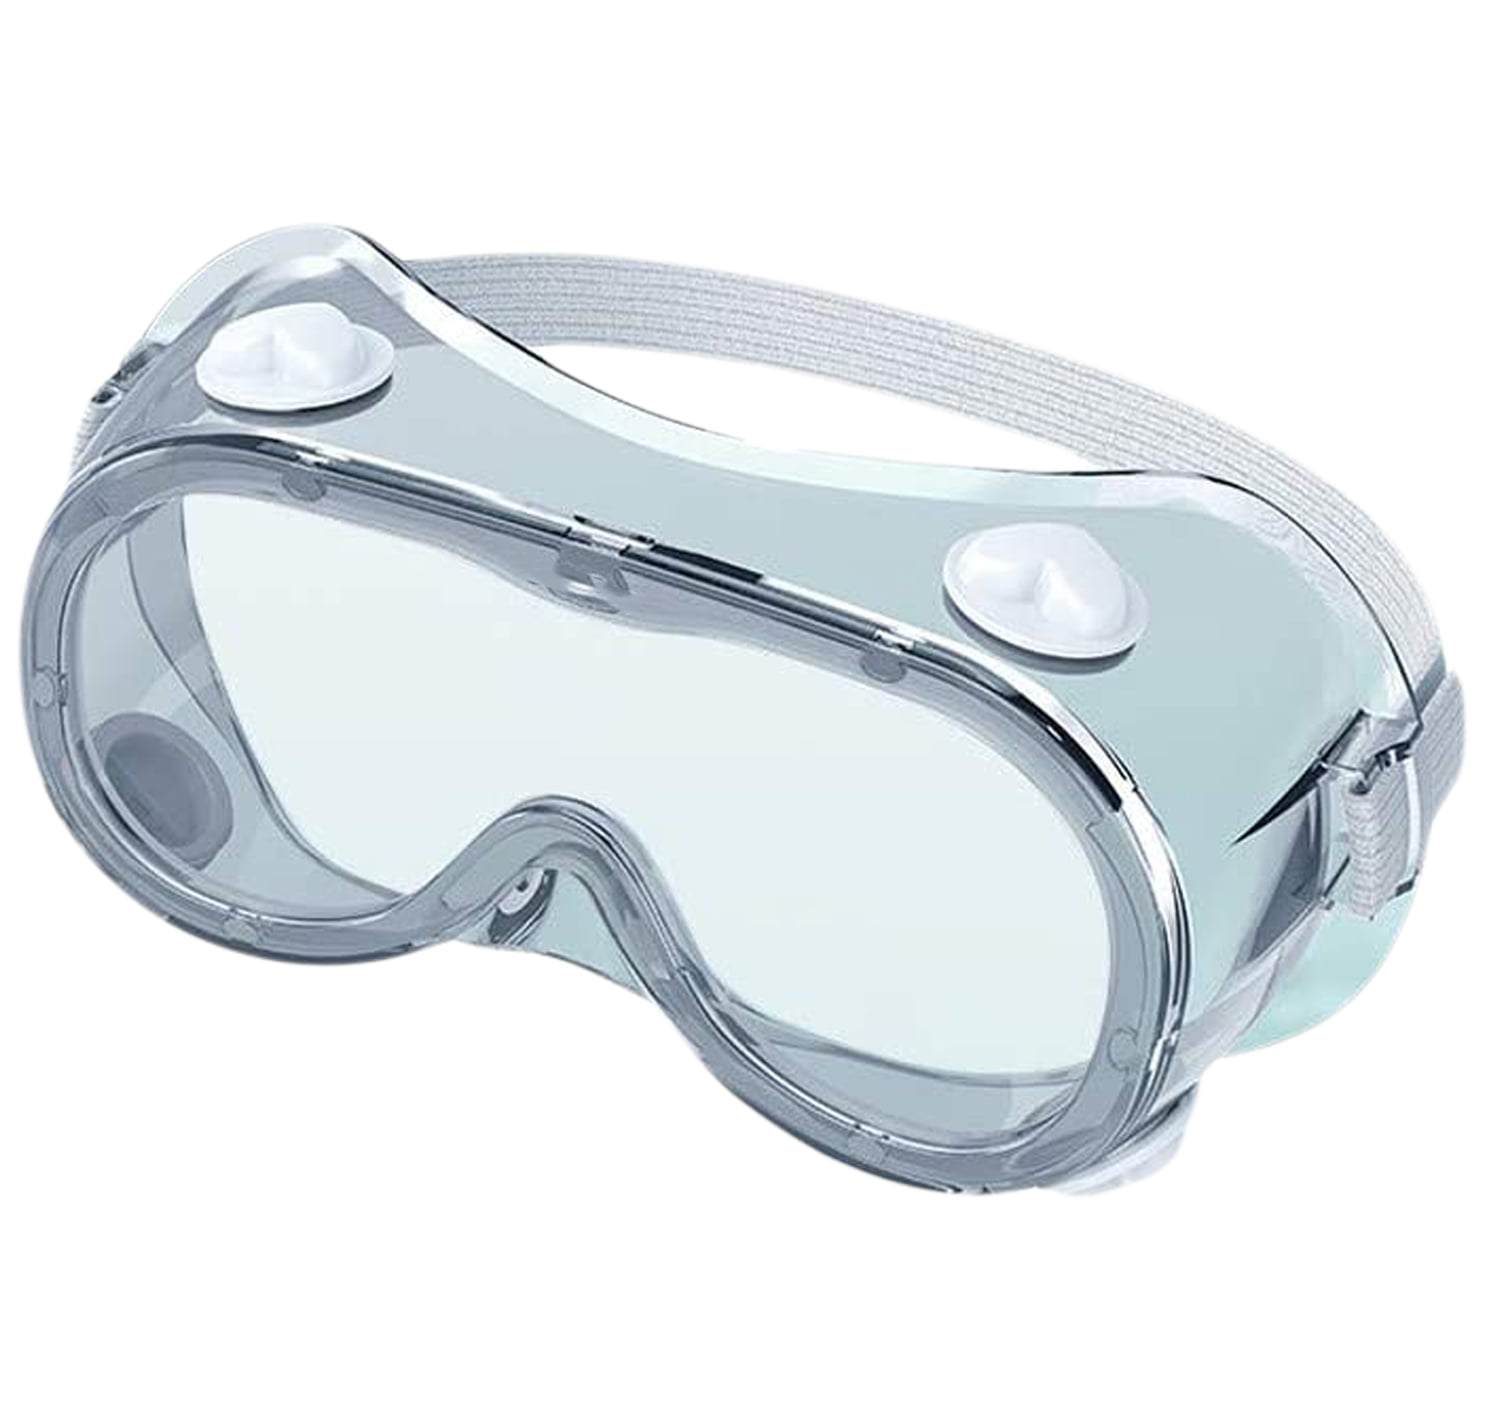 Anti Droplet Safety Goggles Eye Protector Cover strimusimak Anti Fog PM 2.5 Transparent Eyemask